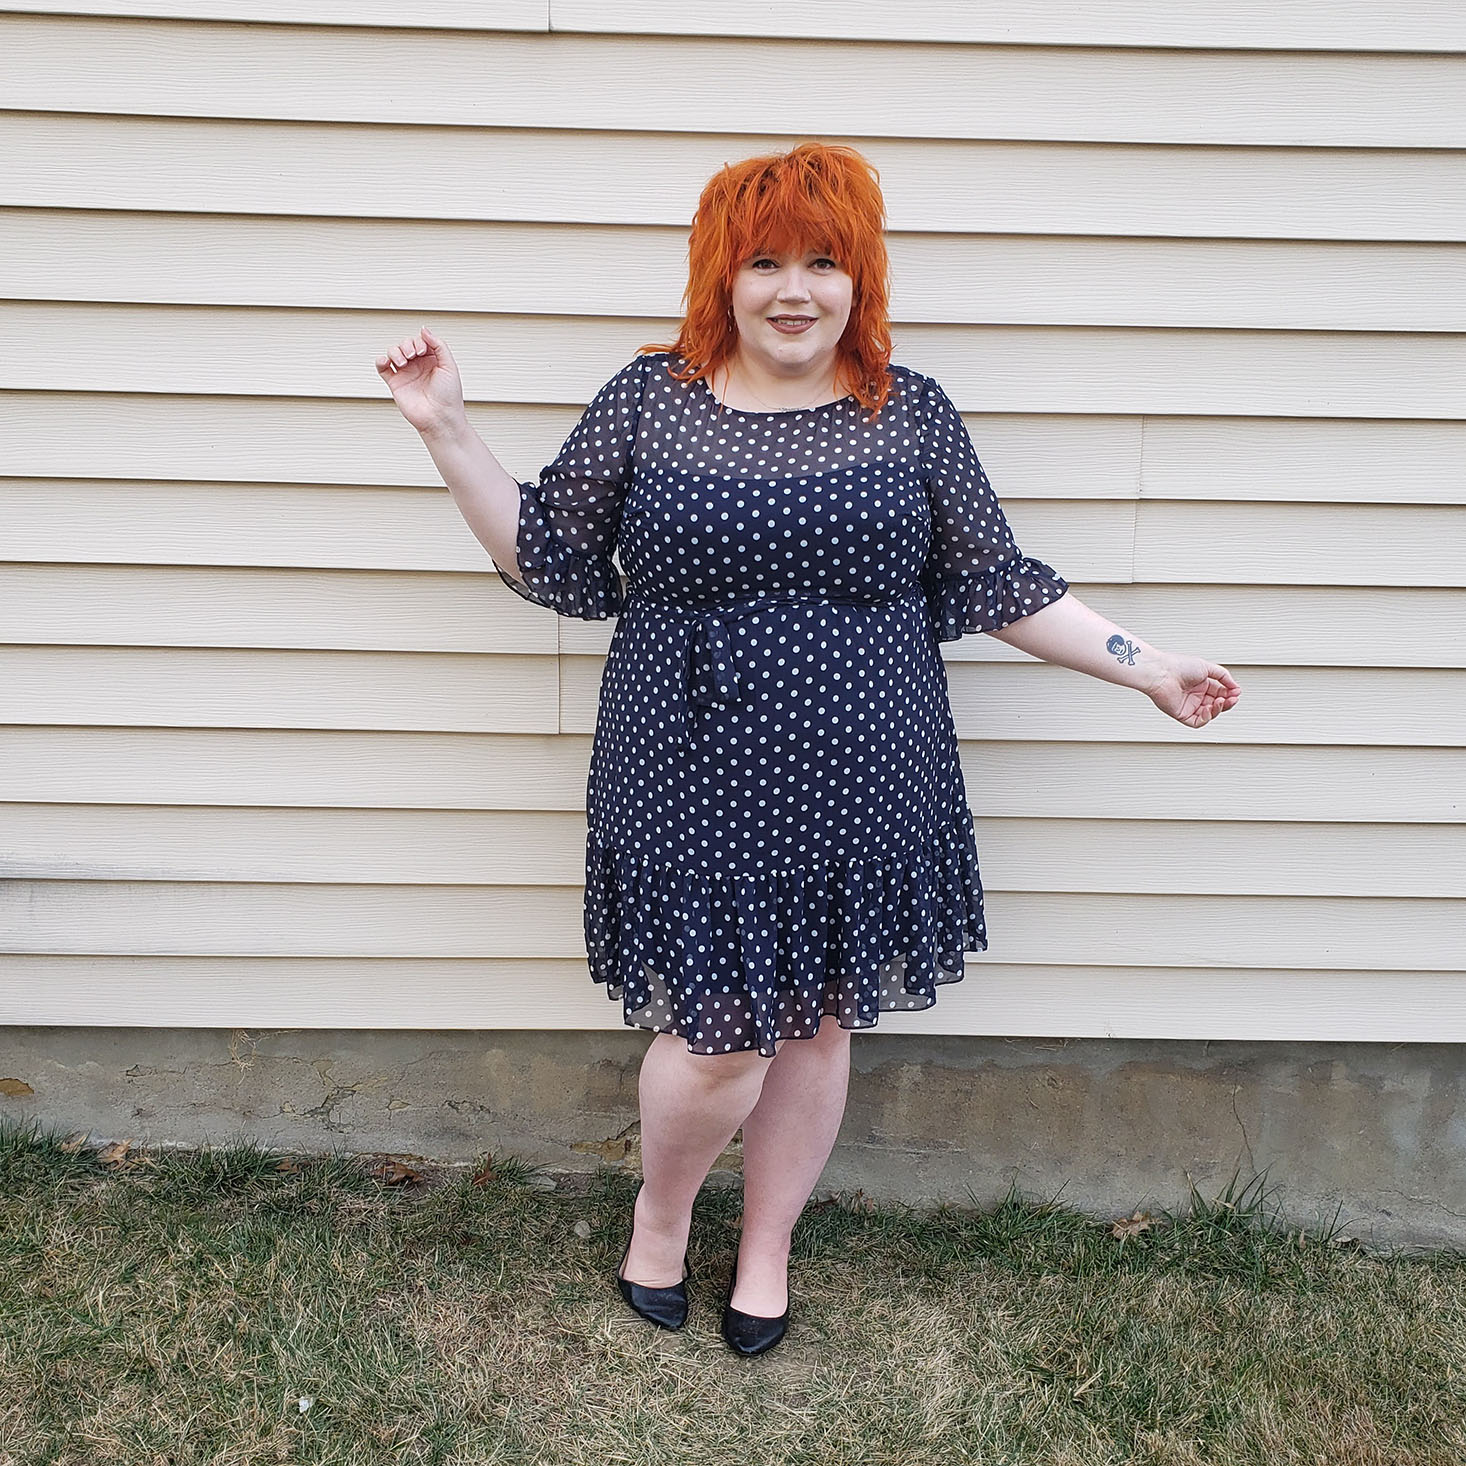 Gwynnie Bee Plus Size Clothing Box Review + 50% Off Coupon